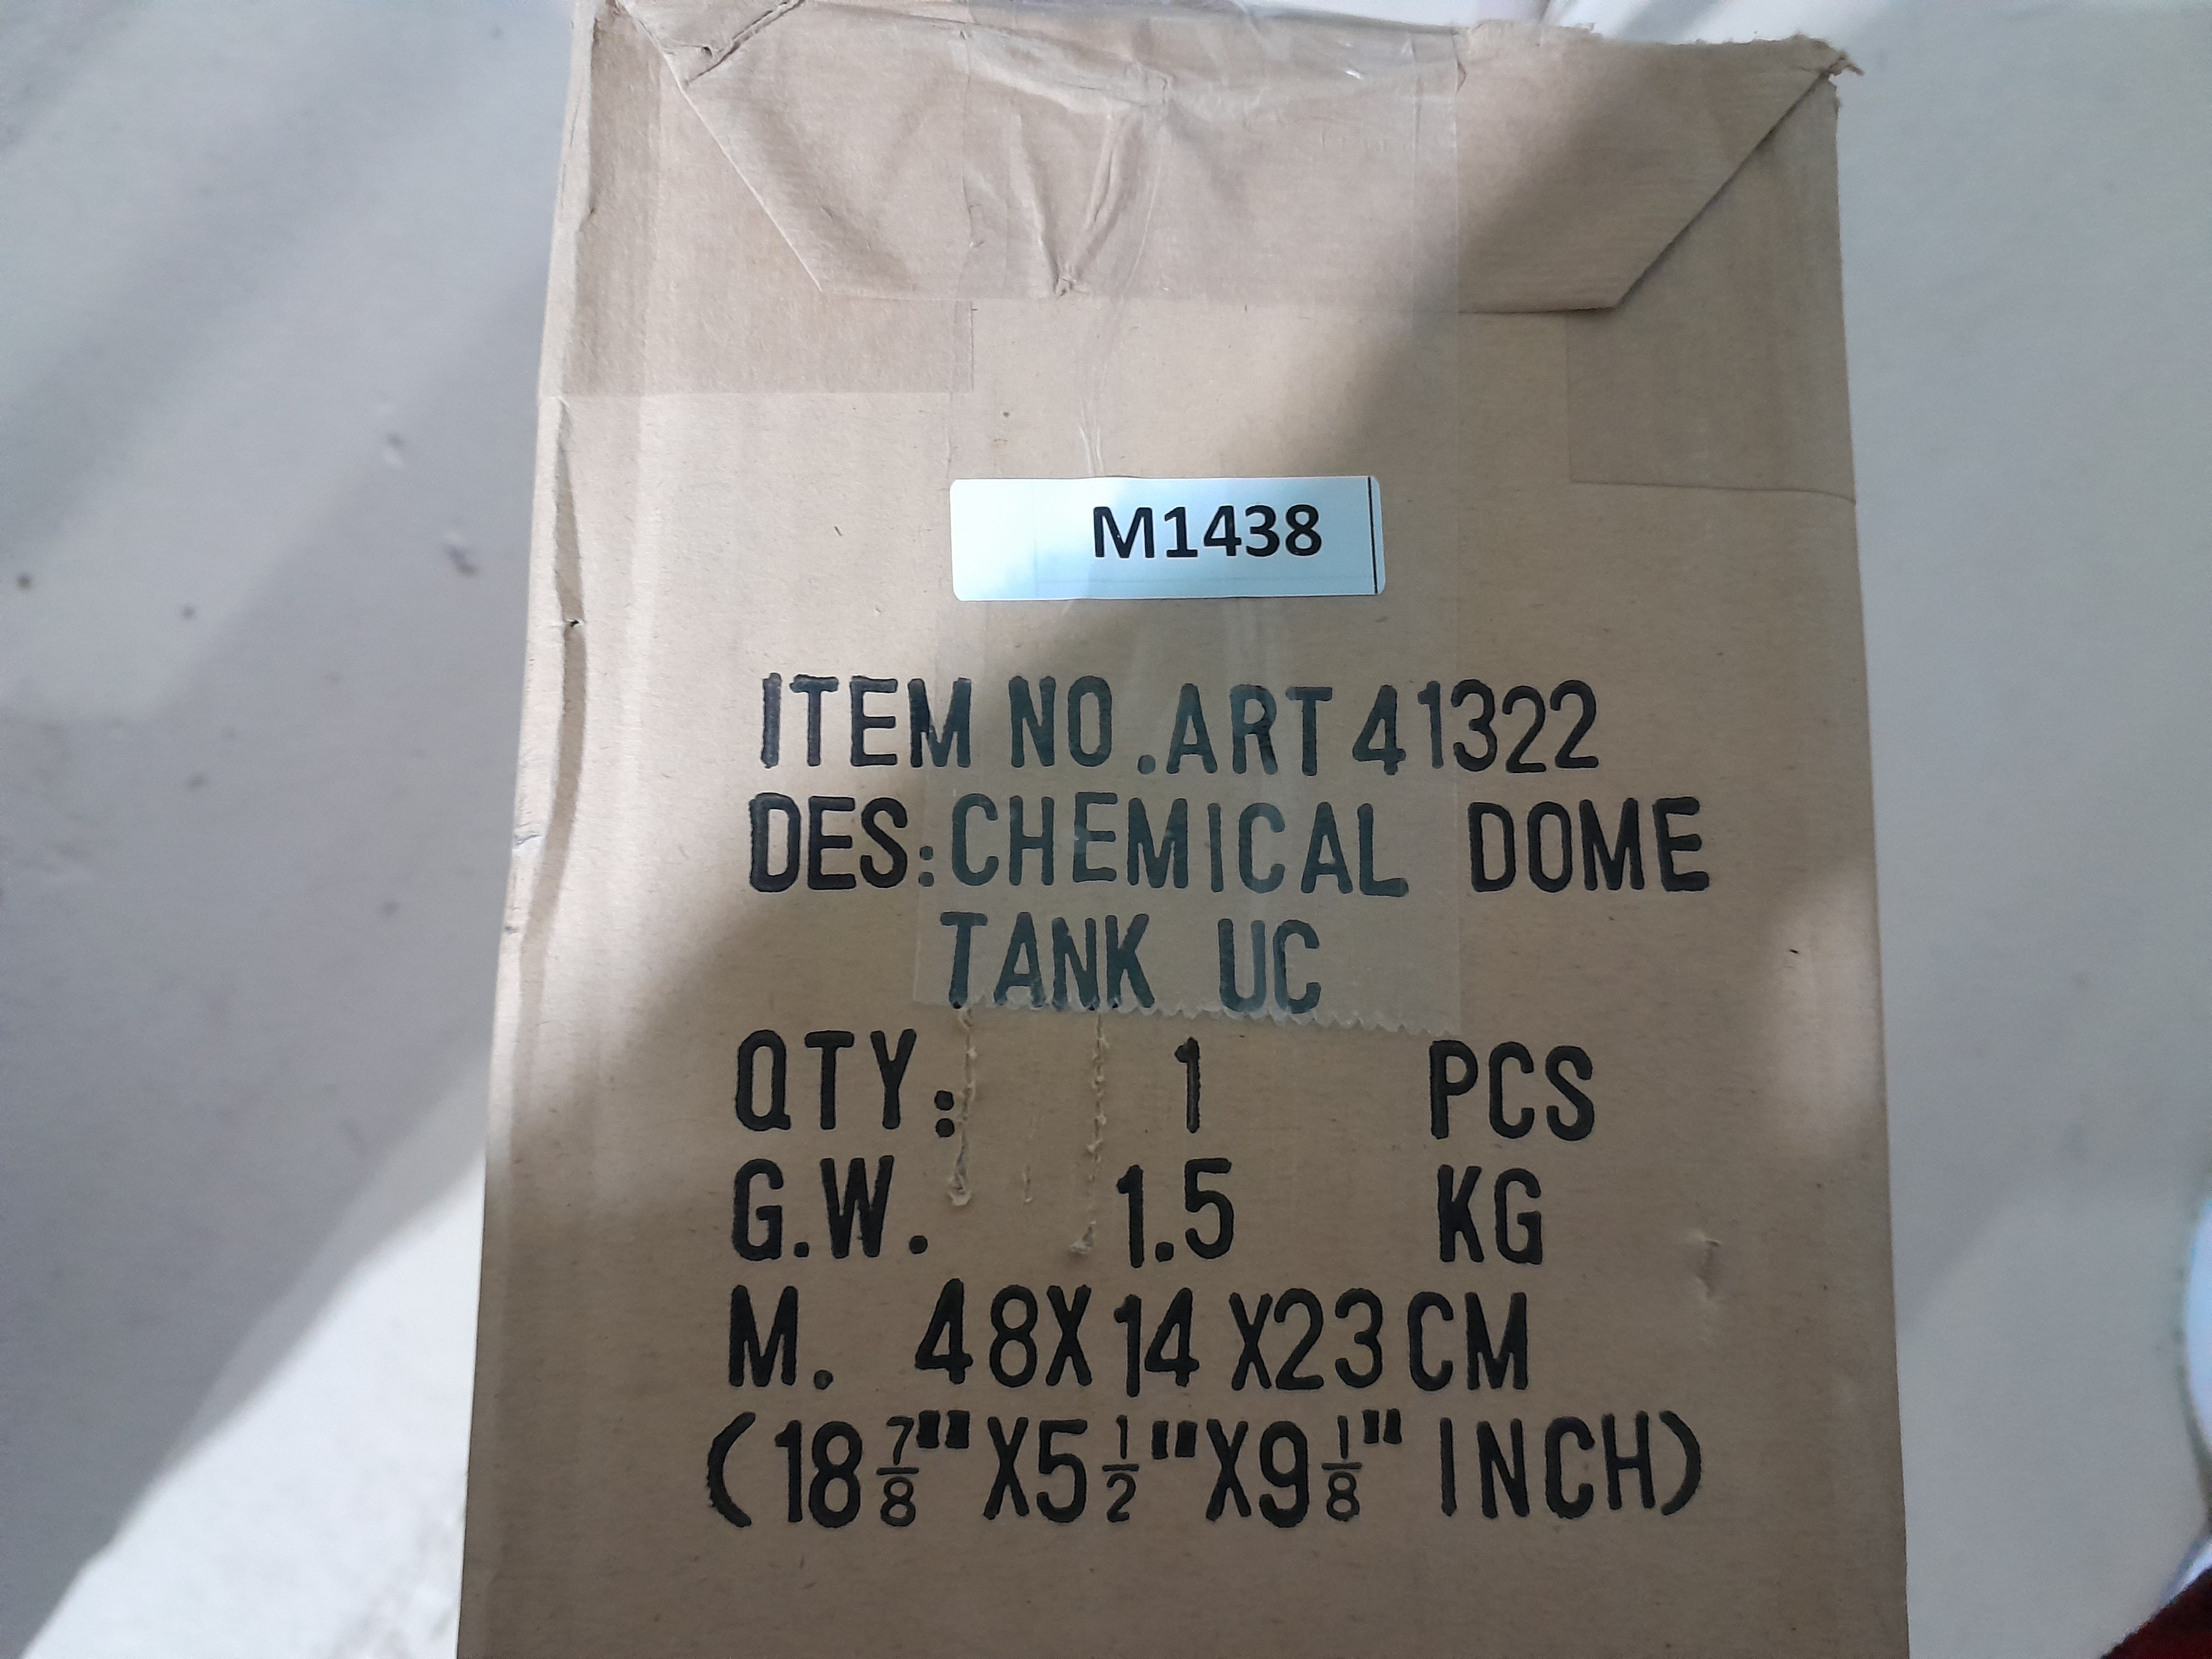 Aristo G-Gauge 41322 Chemical Dome Tank UC-Second hand-M9438